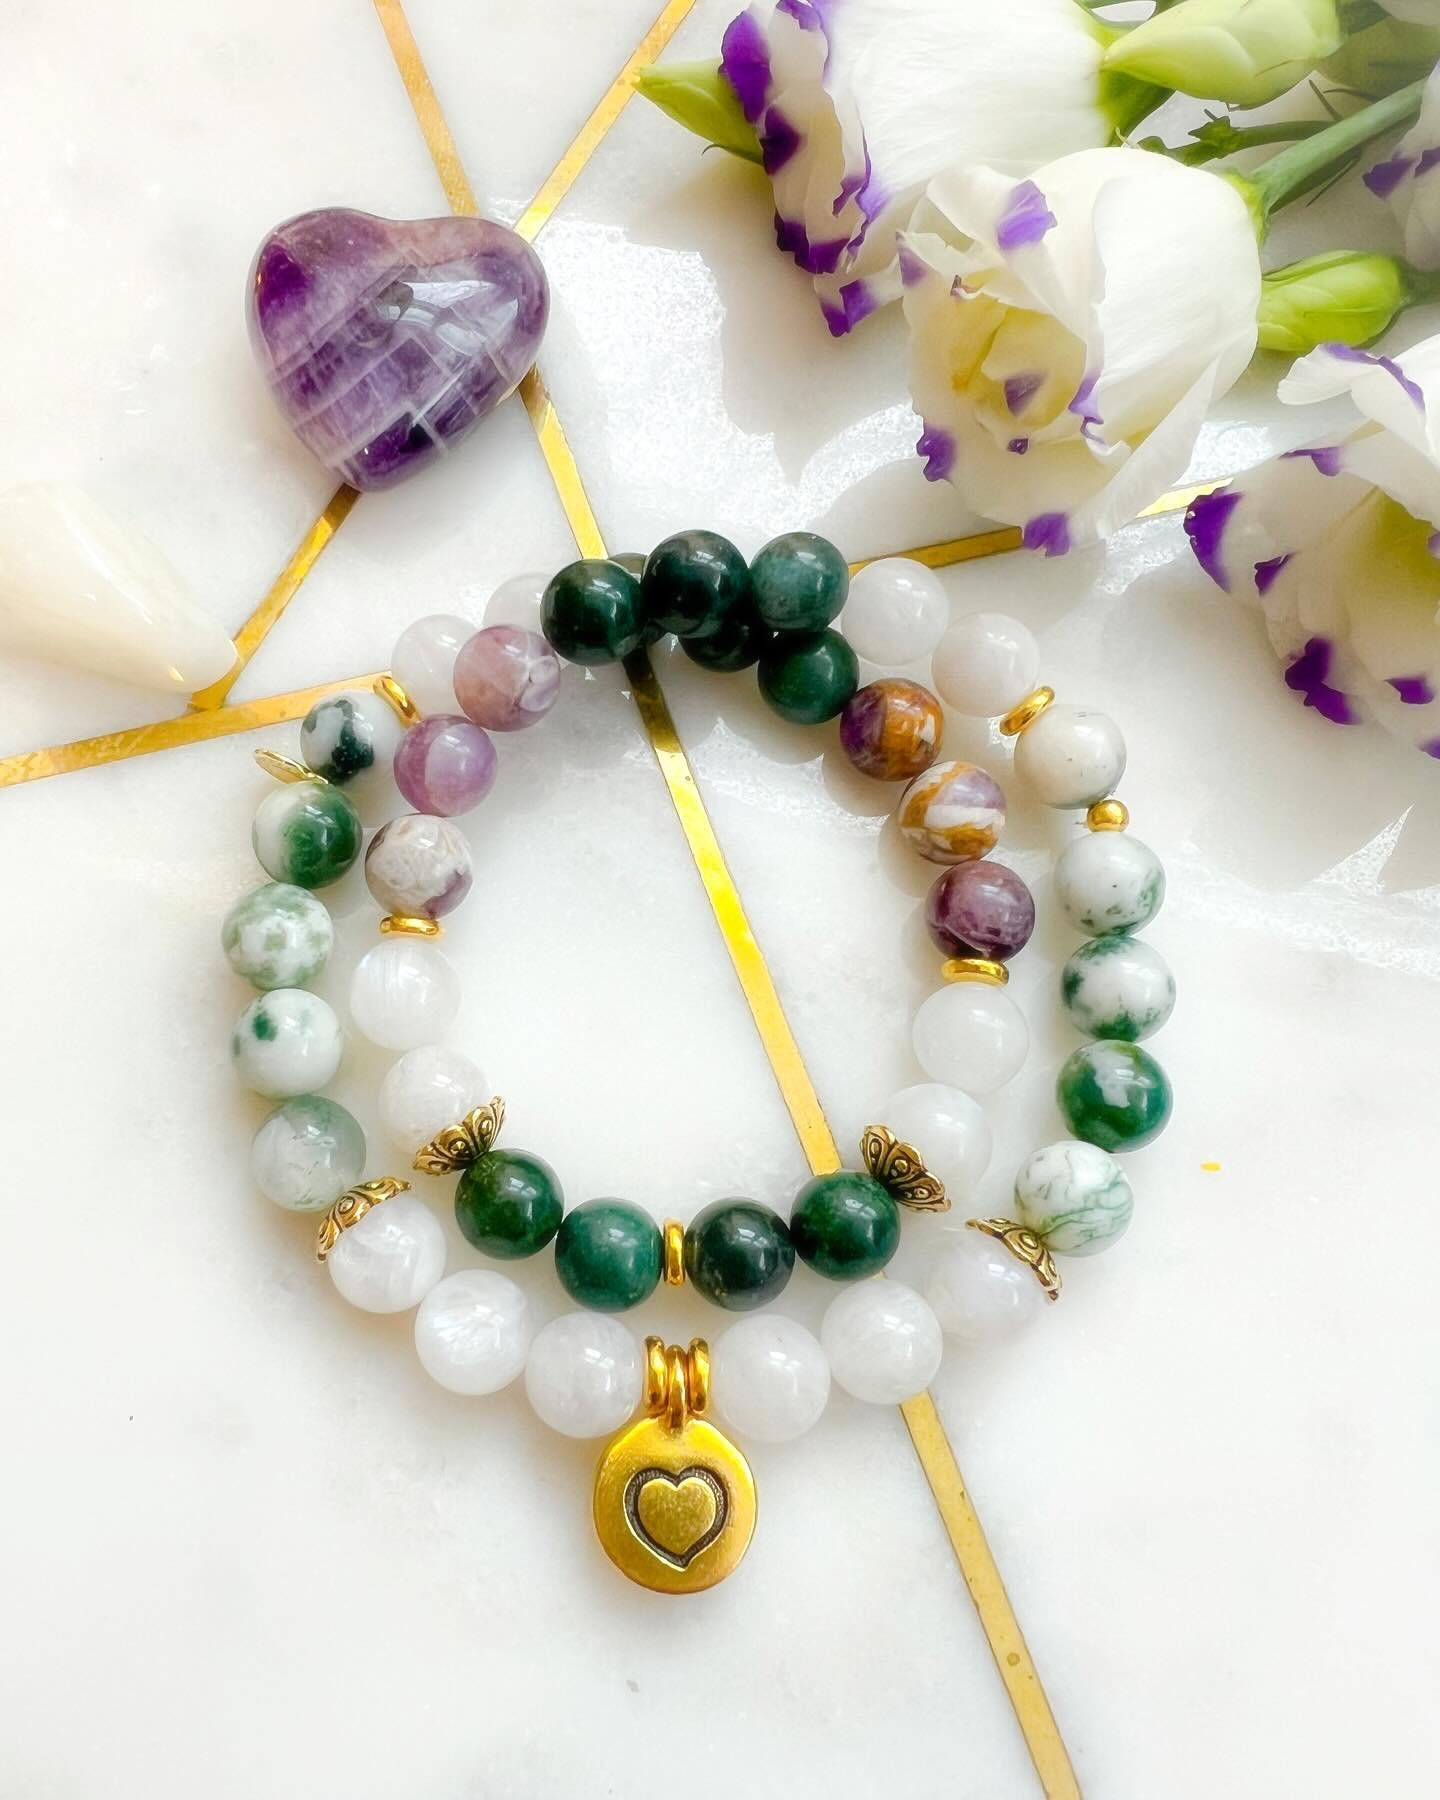 A commission, titled Bravery. The intentional bracelet is made with nurturing Moonstone, protective Tree Jasper, intuitive Chevron Amethyst, and heart healing Green Moss Agate. 🤍💚💜